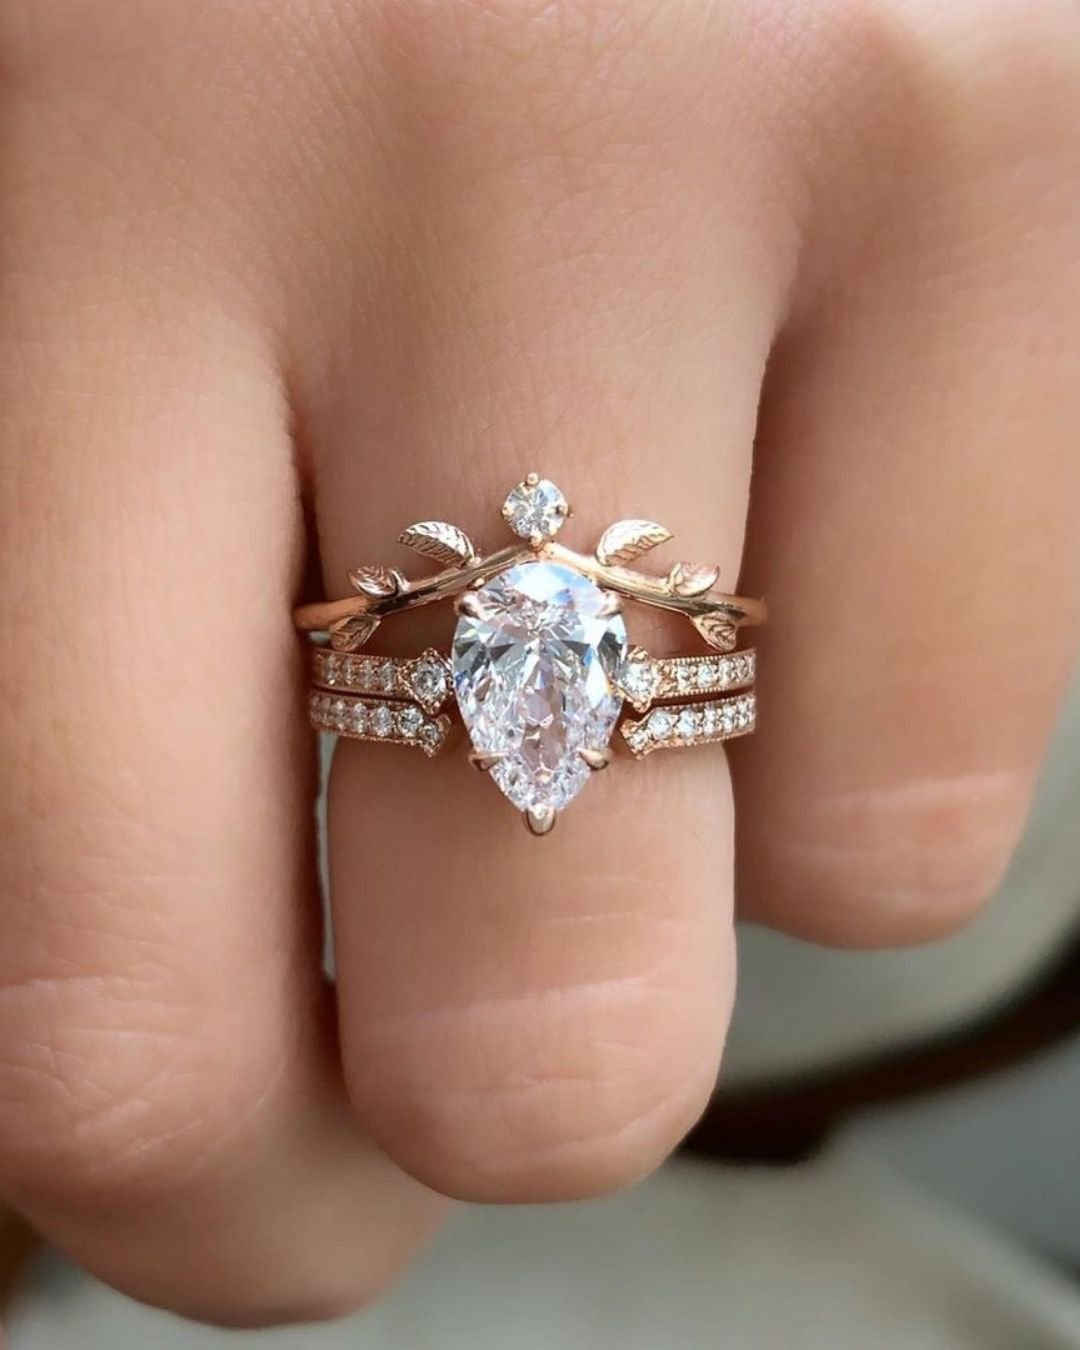 engagement rings for women pear shaped wedding rings1